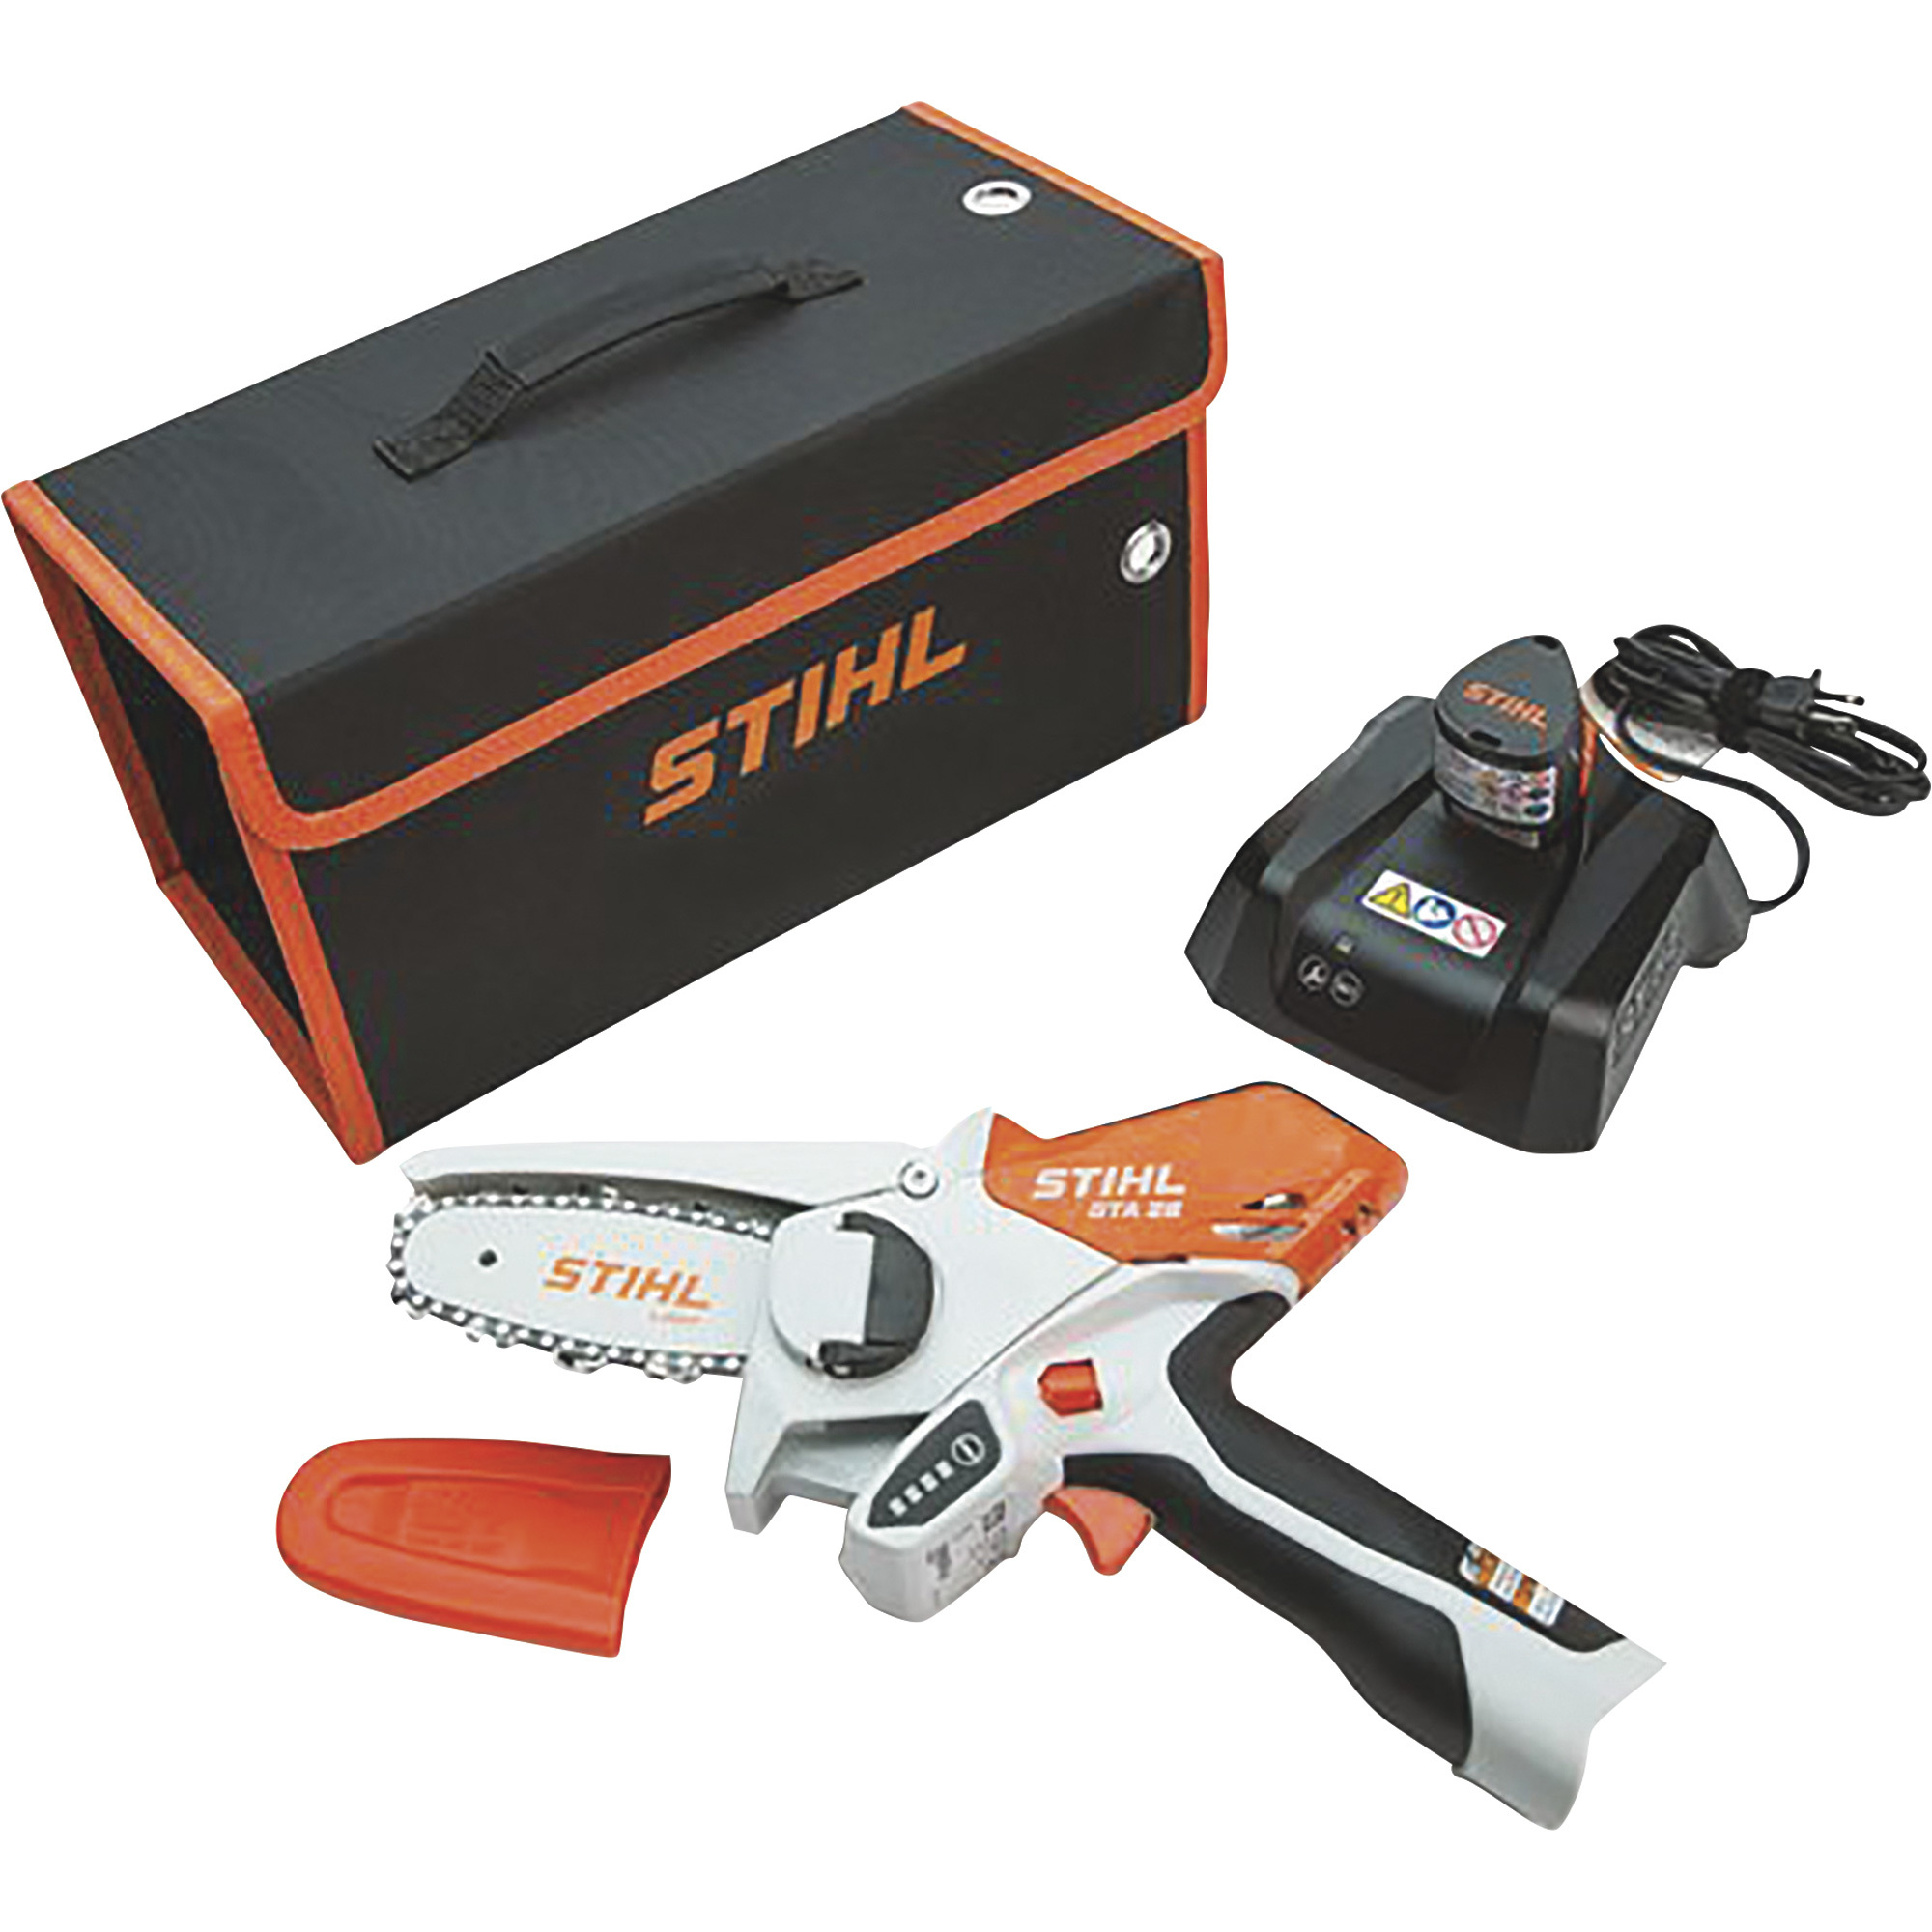 STIHL Battery-Operated Cordless Pruning Saw with Battery and Charger â 4Inch Bar, Model GTA 26 SET